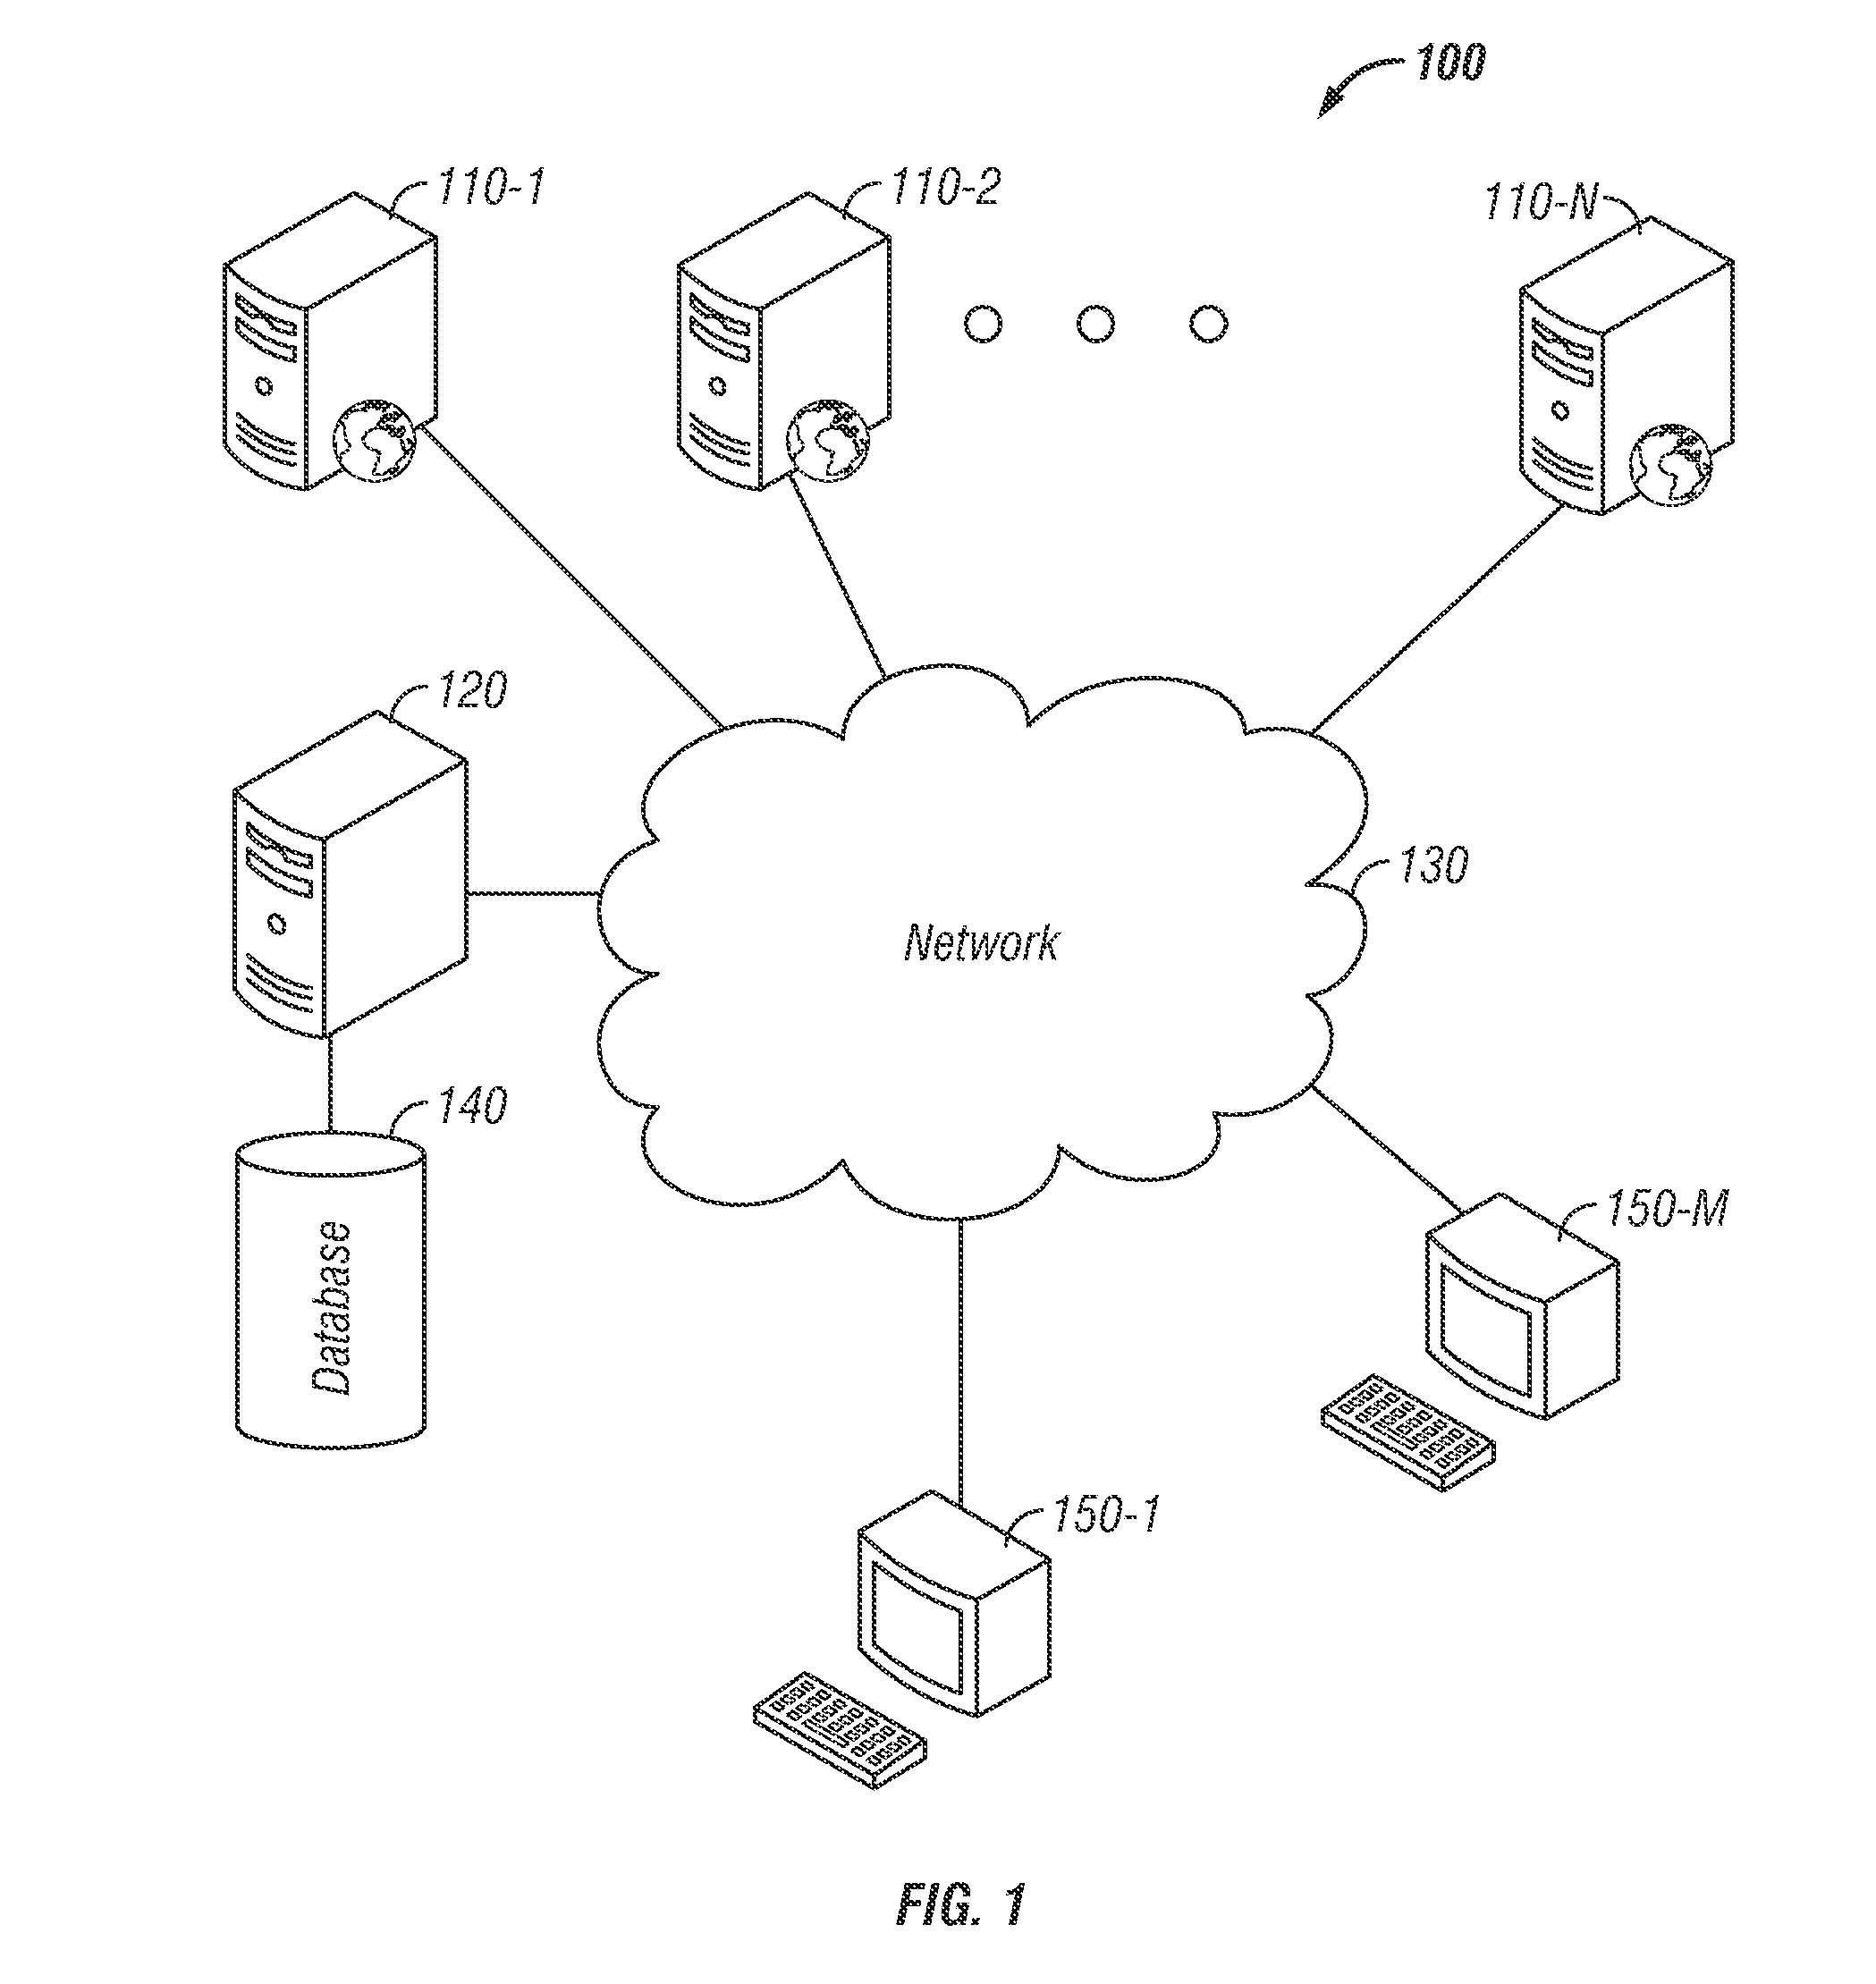 Method and Apparatus for Passively Monitoring Online Video Viewing and Viewer Behavior